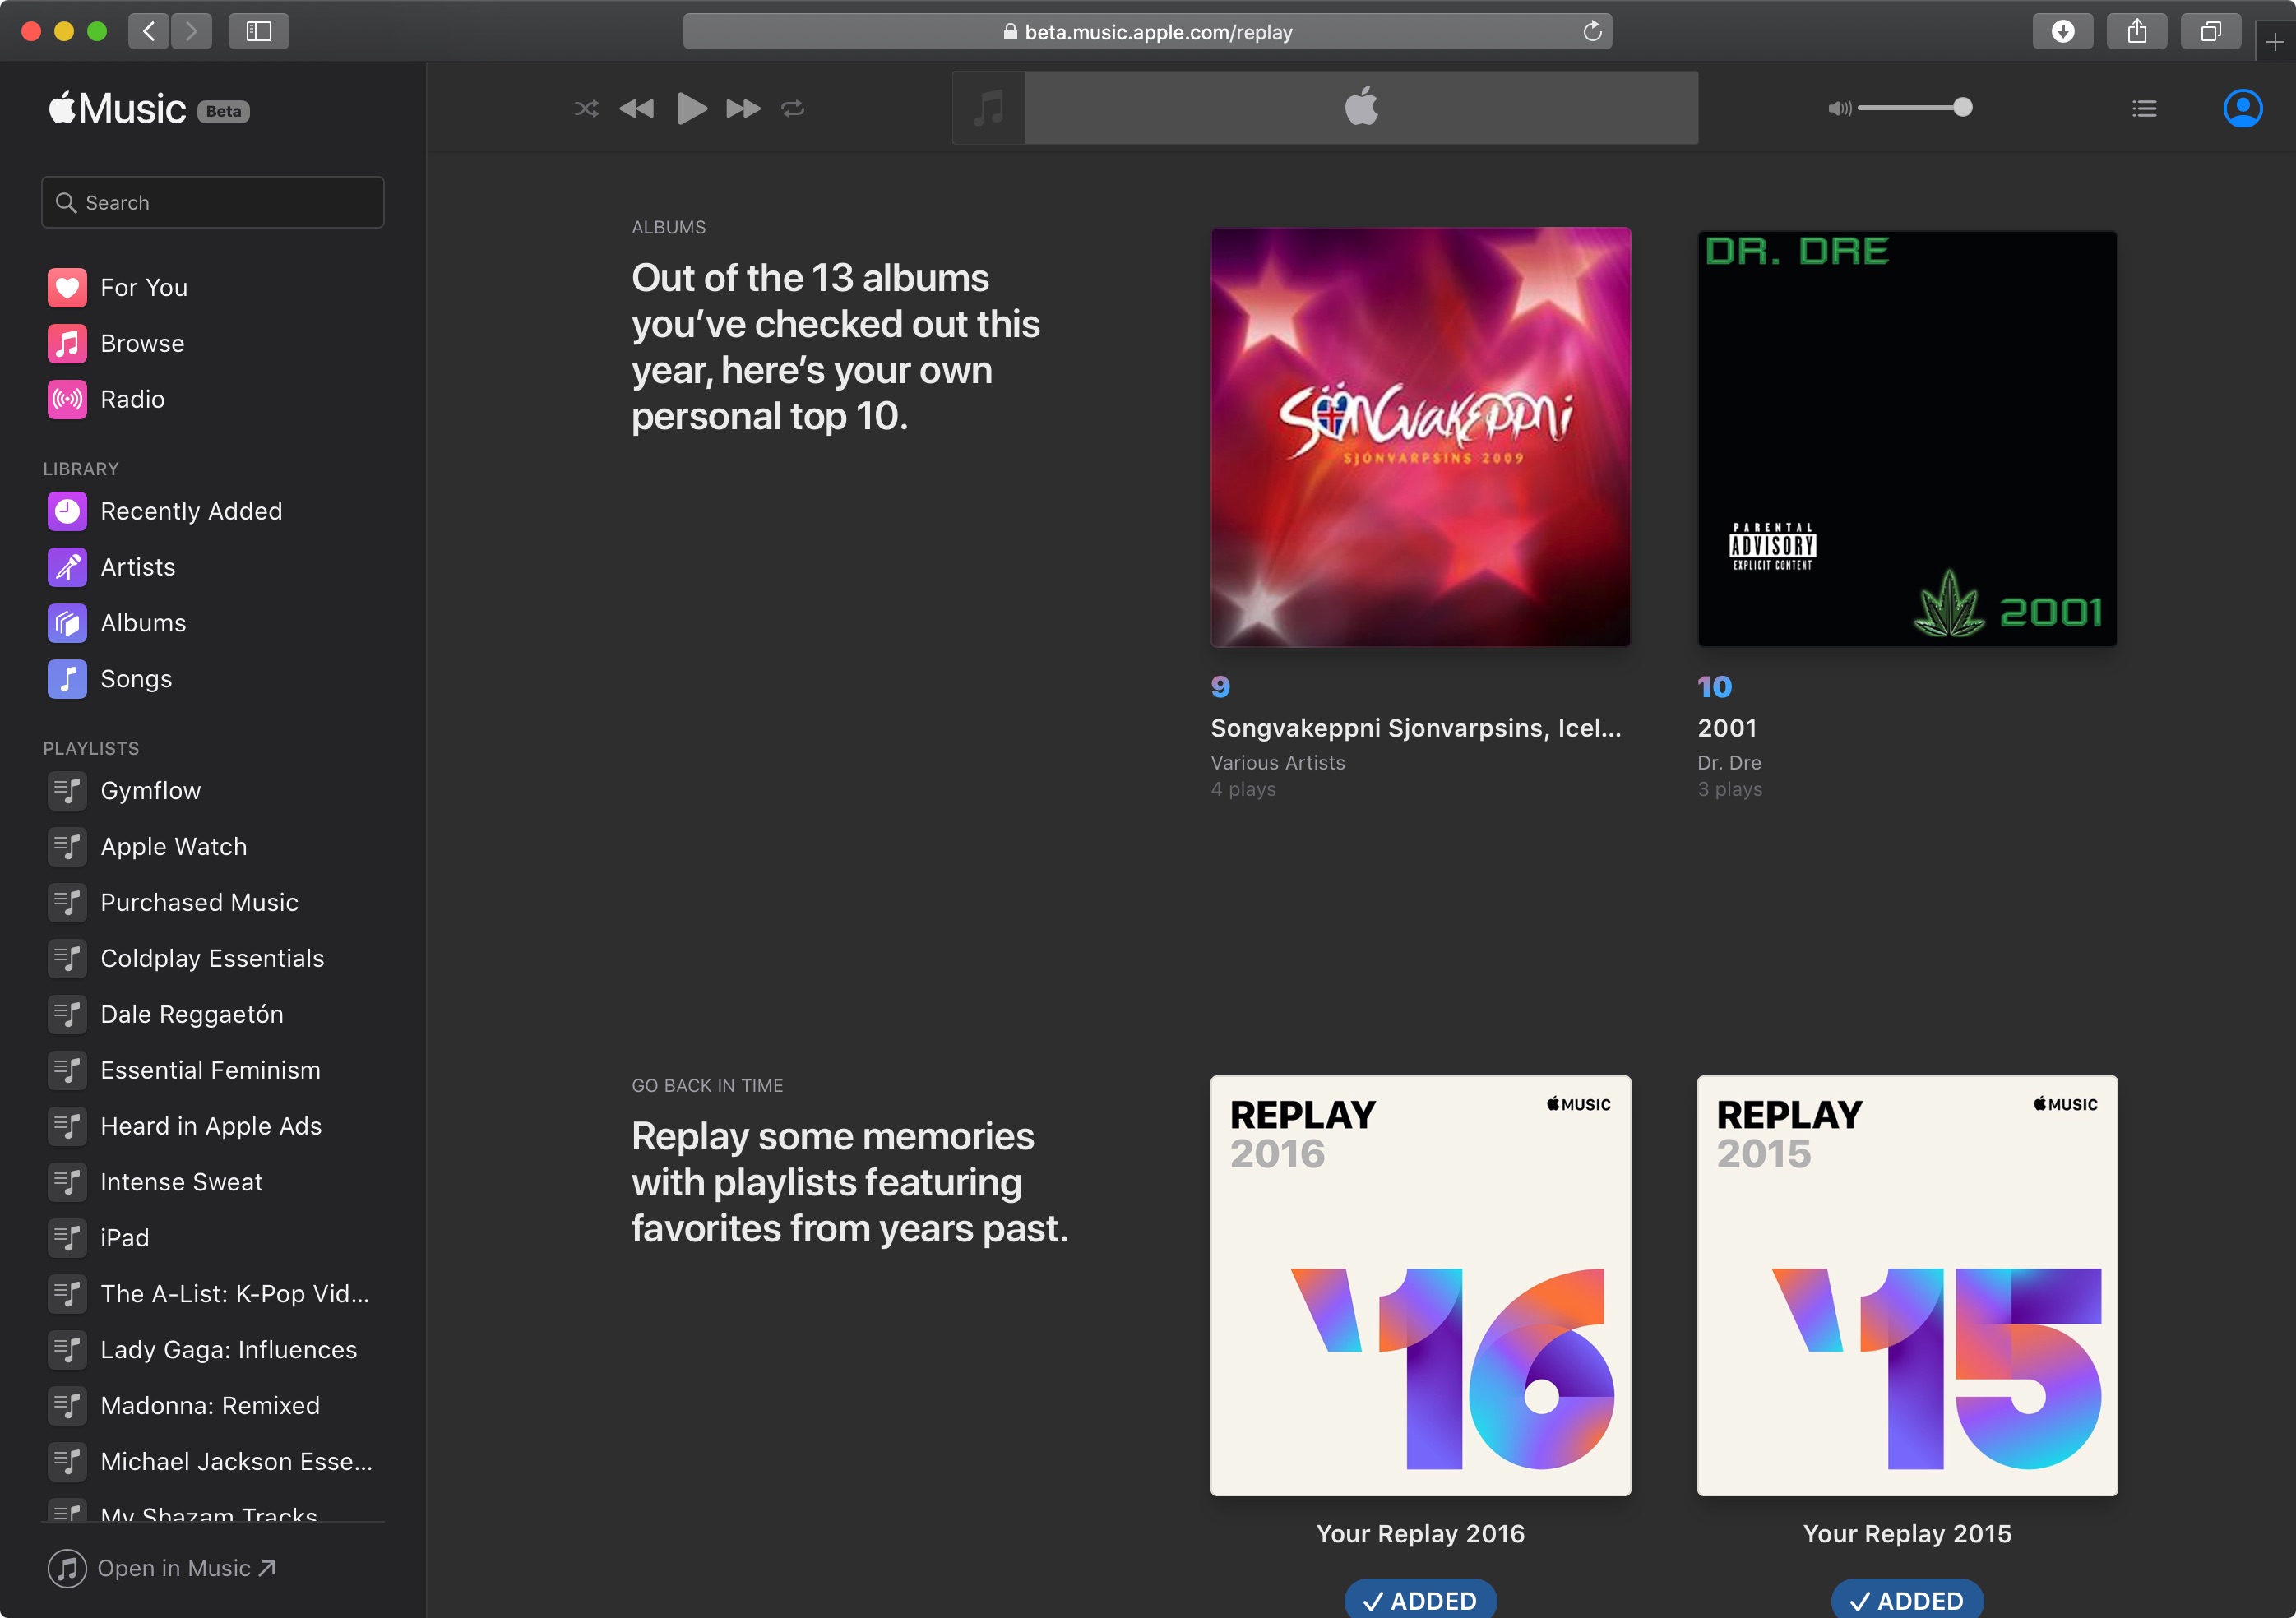 How To Use Apple Music Replay To Get A Playlist With Your Top Songs